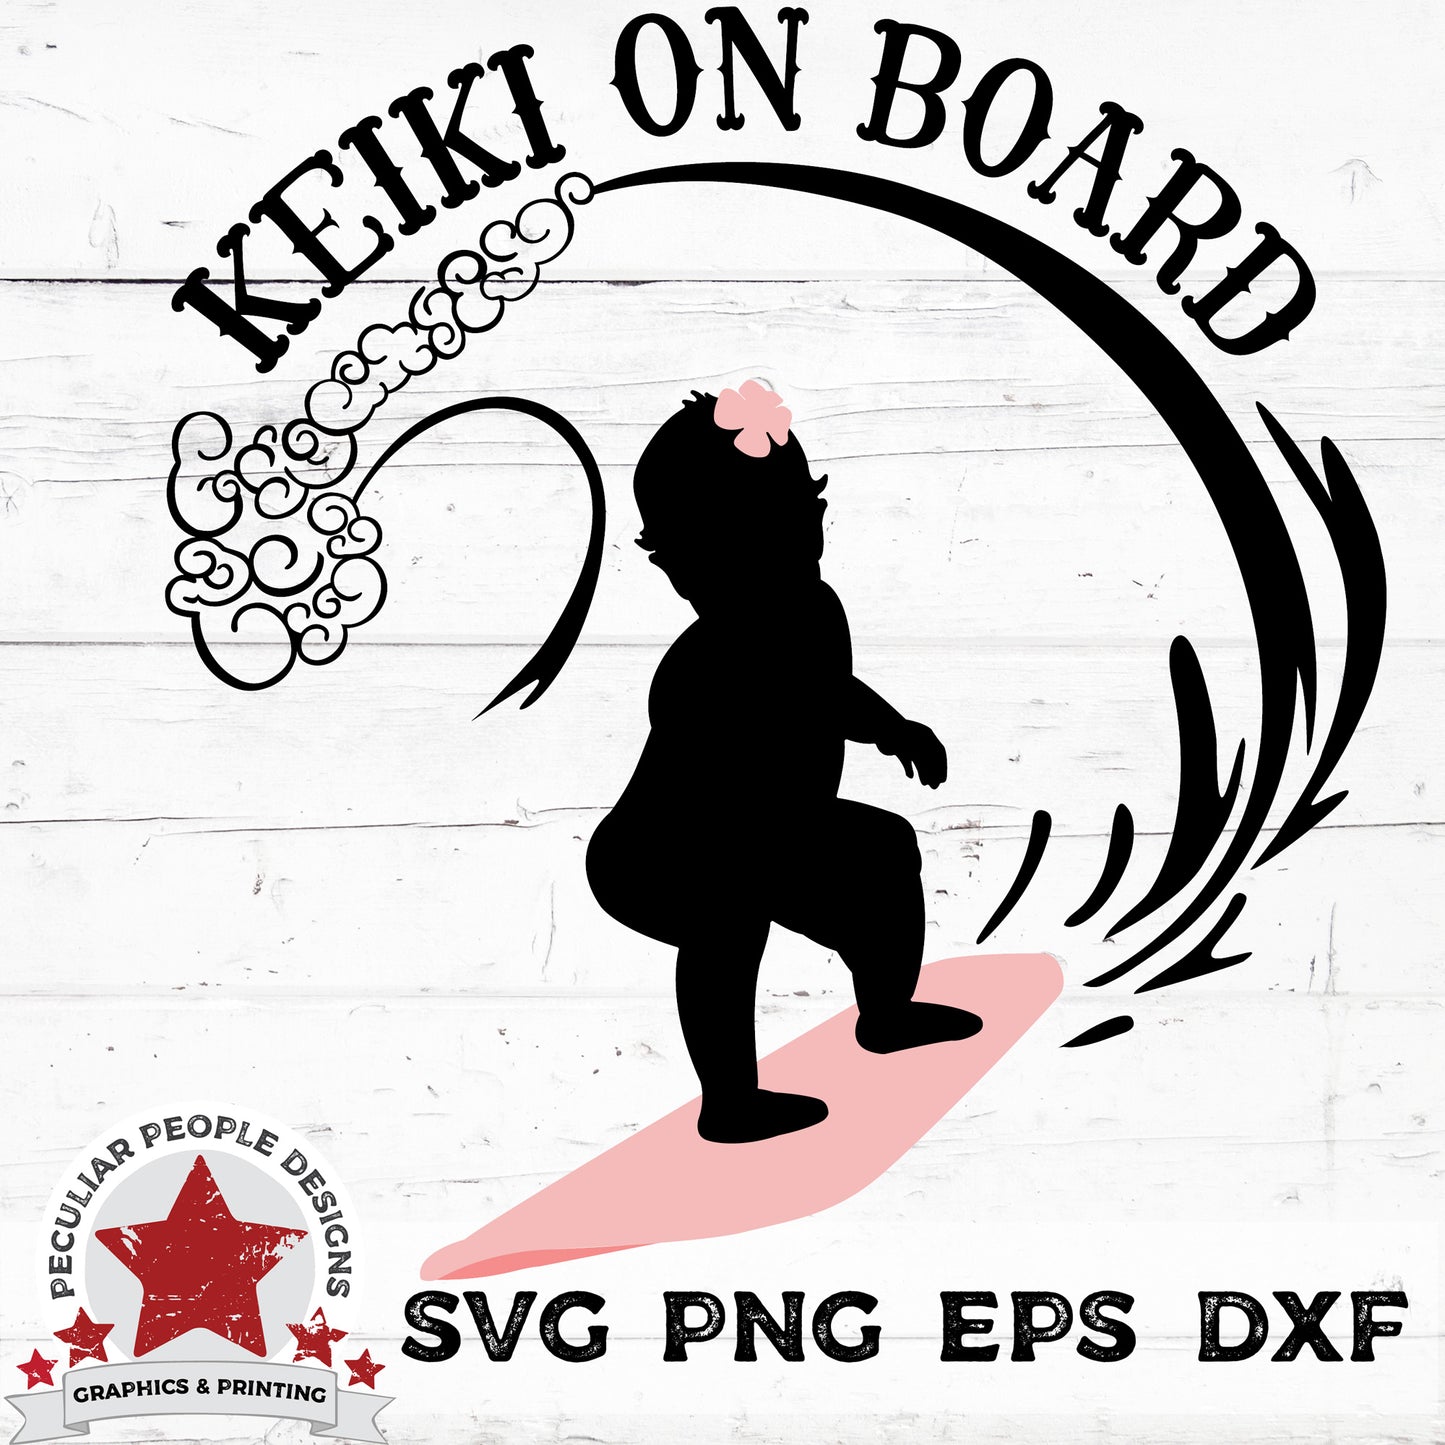 a vector design of a hawaiian surfer, baby girl on a surfboard with a flower in her hair, a wave overhead and text reading "keiki on board"